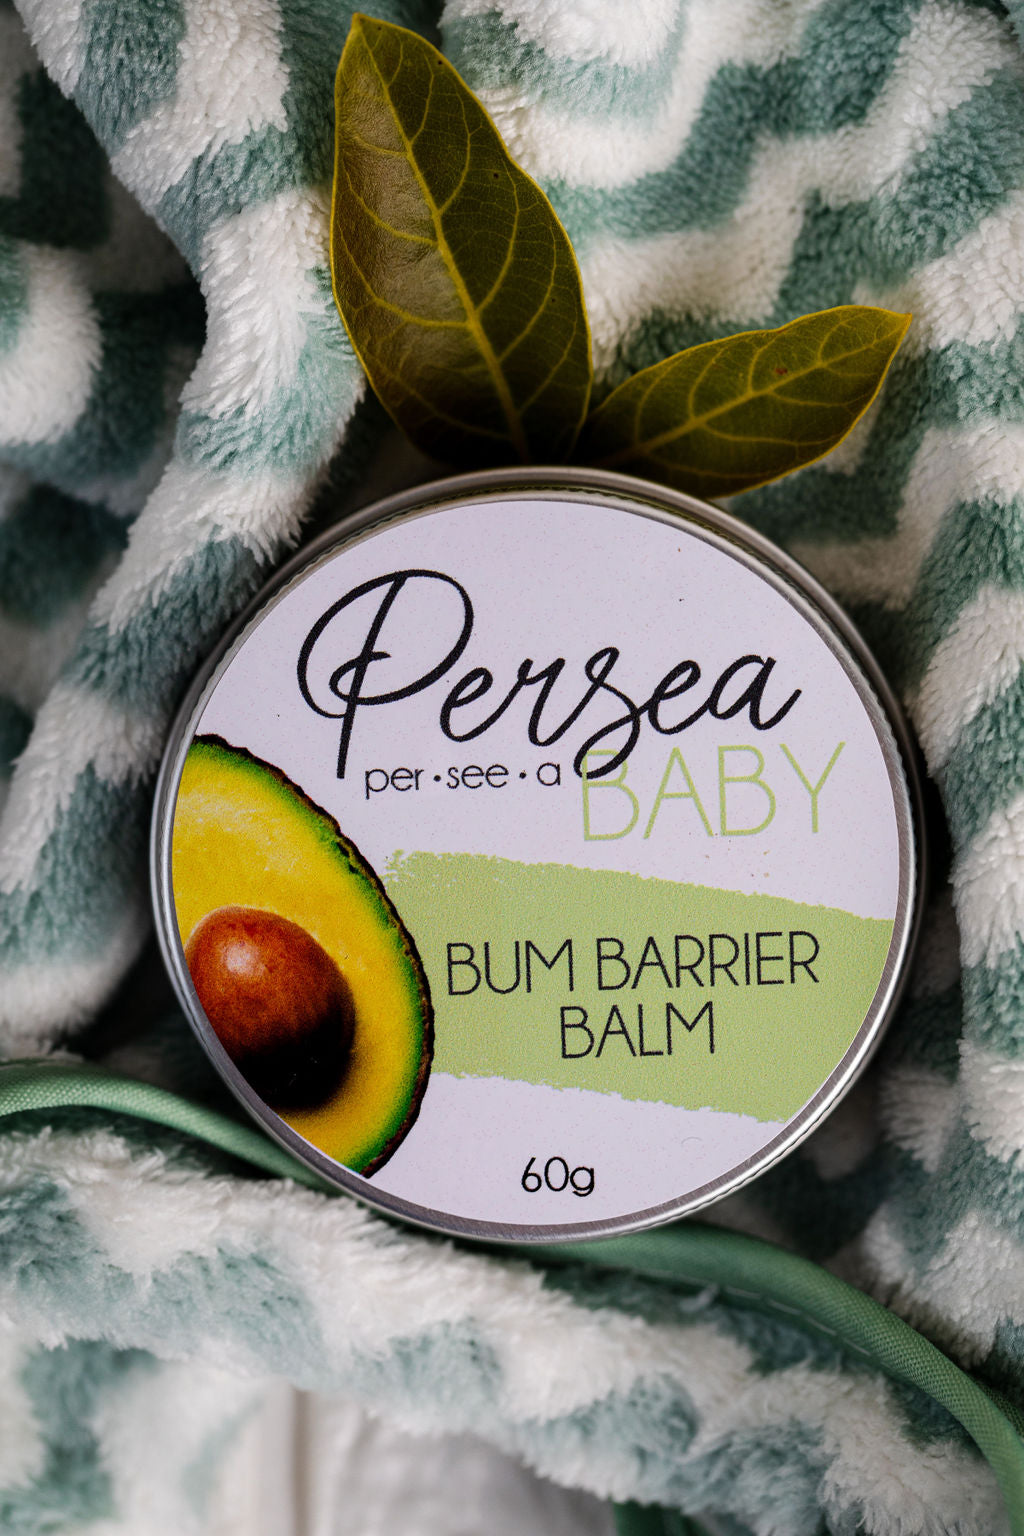 Persea Baby Bum Barrier Balm. All Natural.